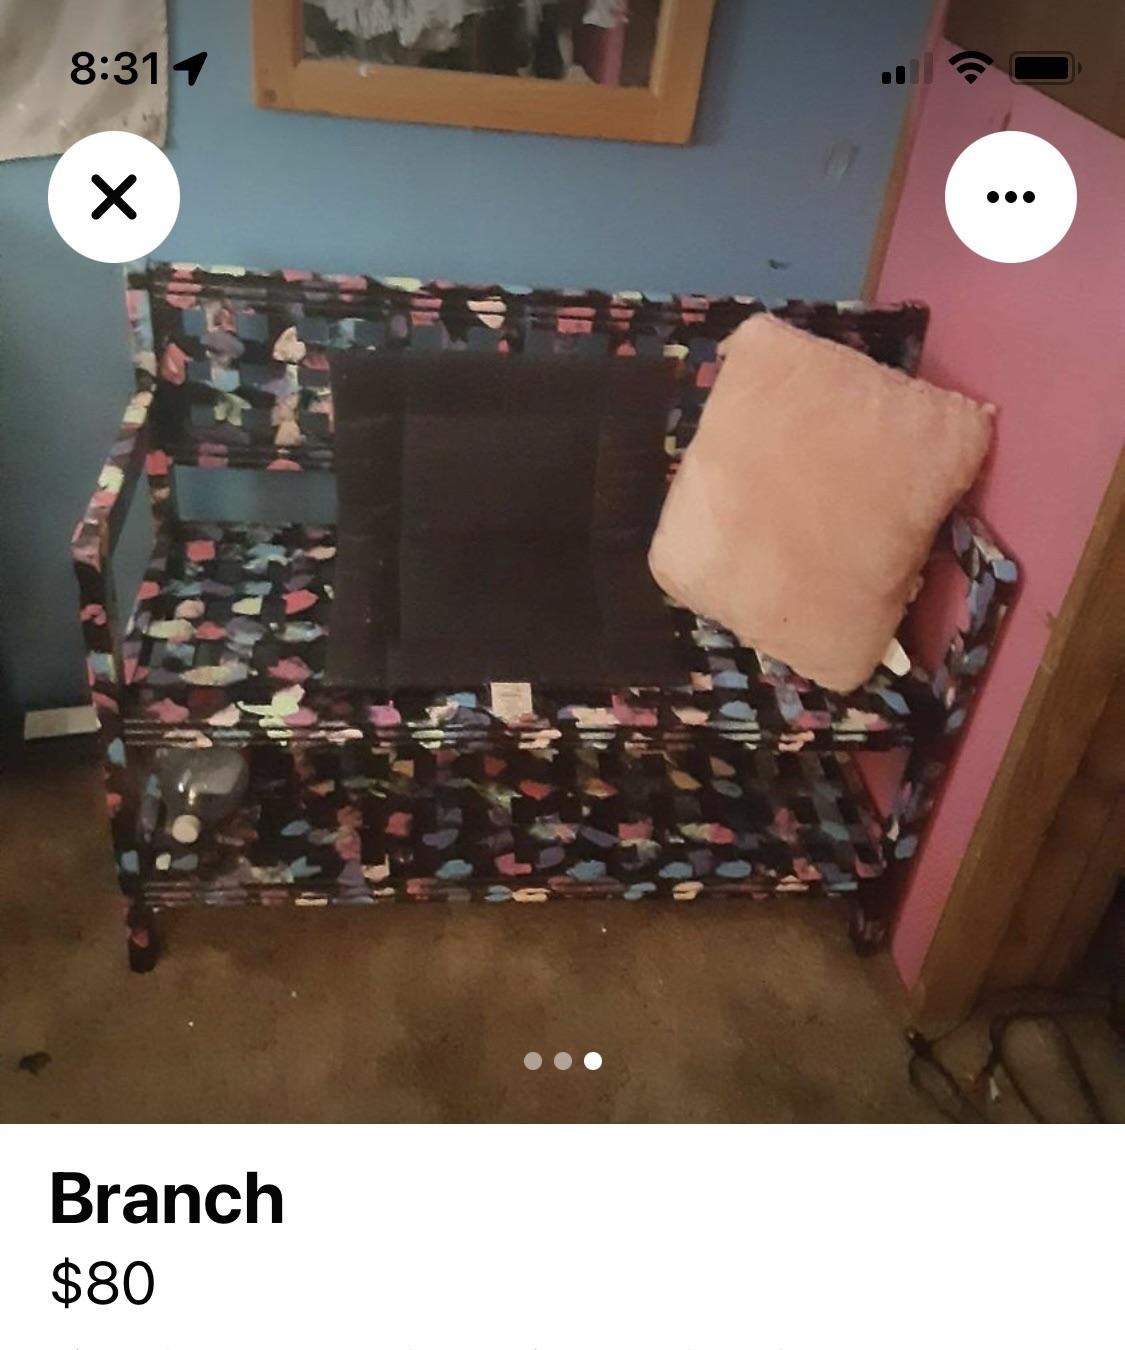 facebook marketplace add for aa bench that reads branch